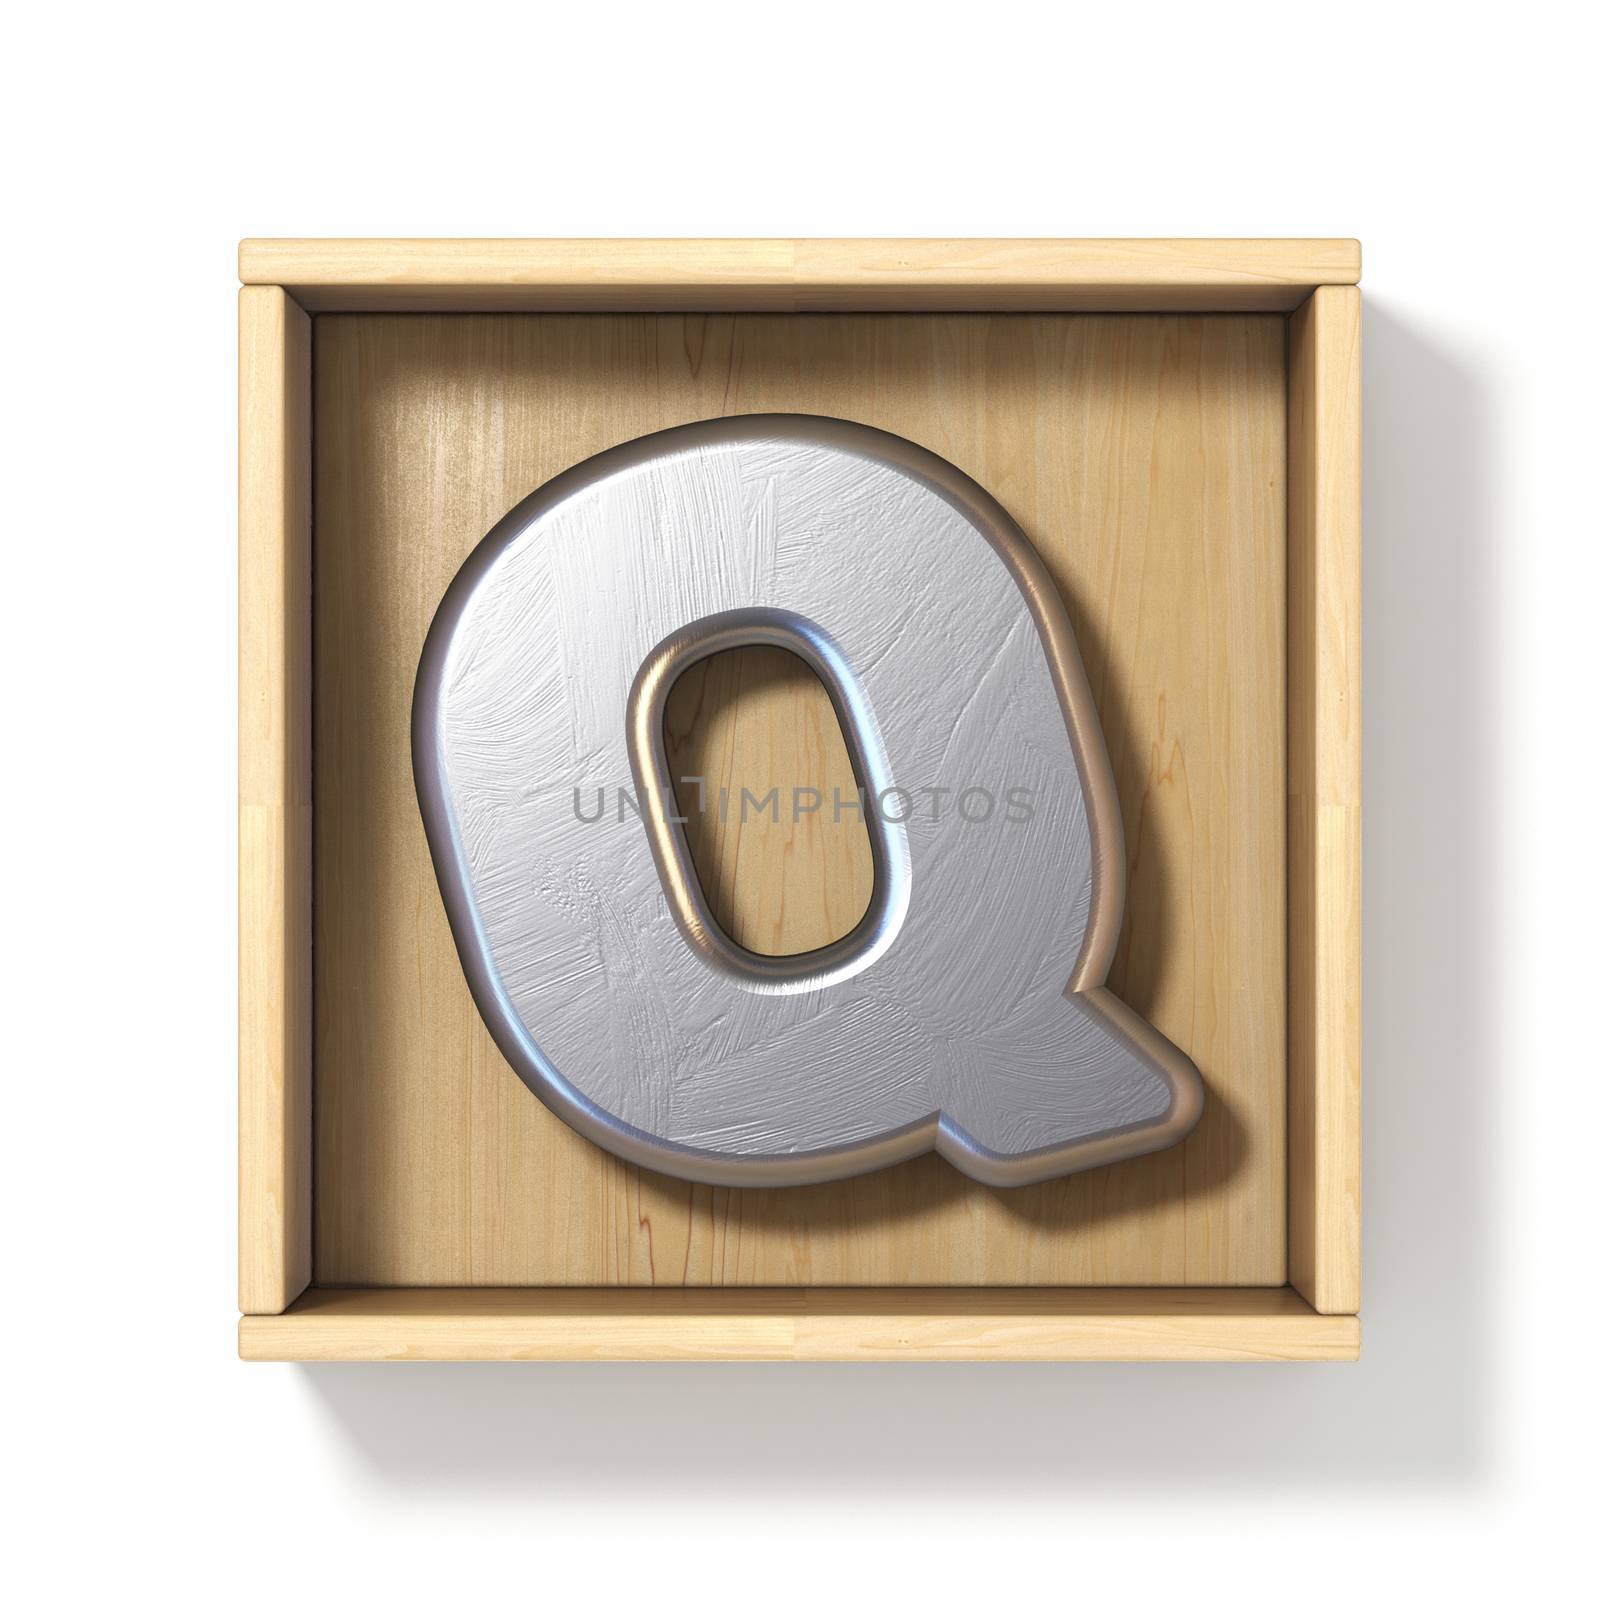 Silver metal letter Q in wooden box 3D render illustration isolated on white background